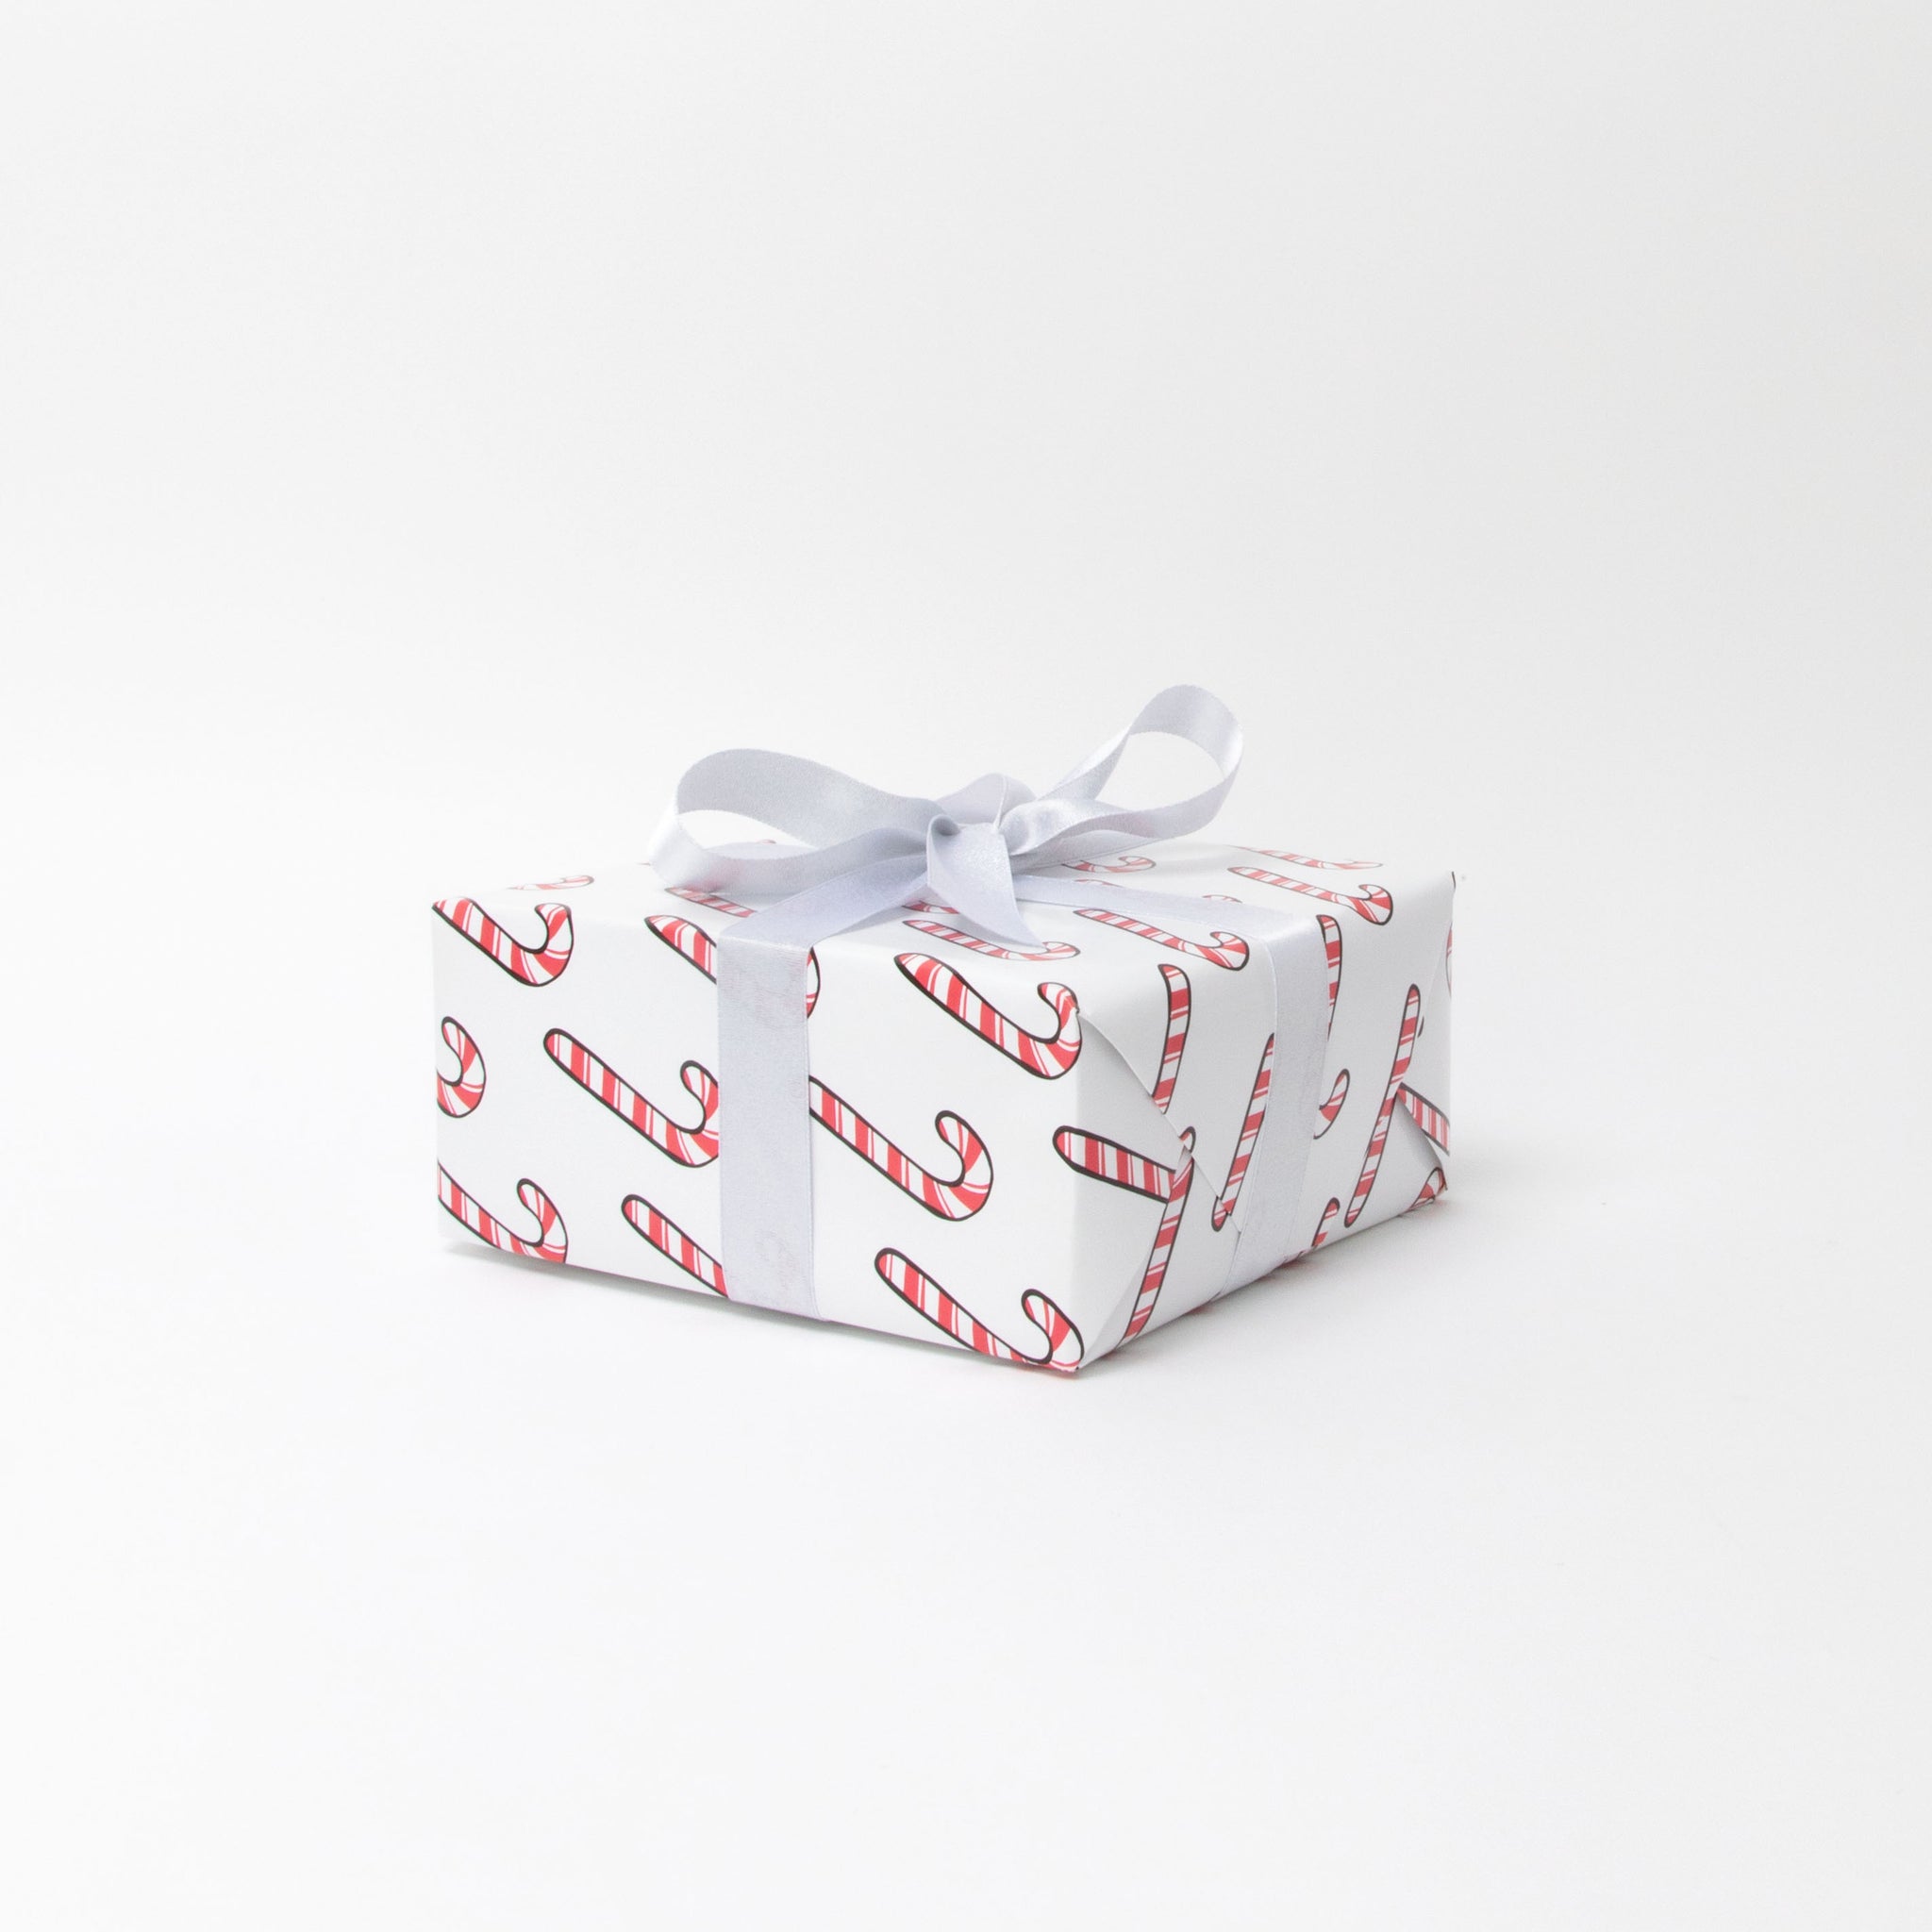 Dandy Candy Wrapping Paper